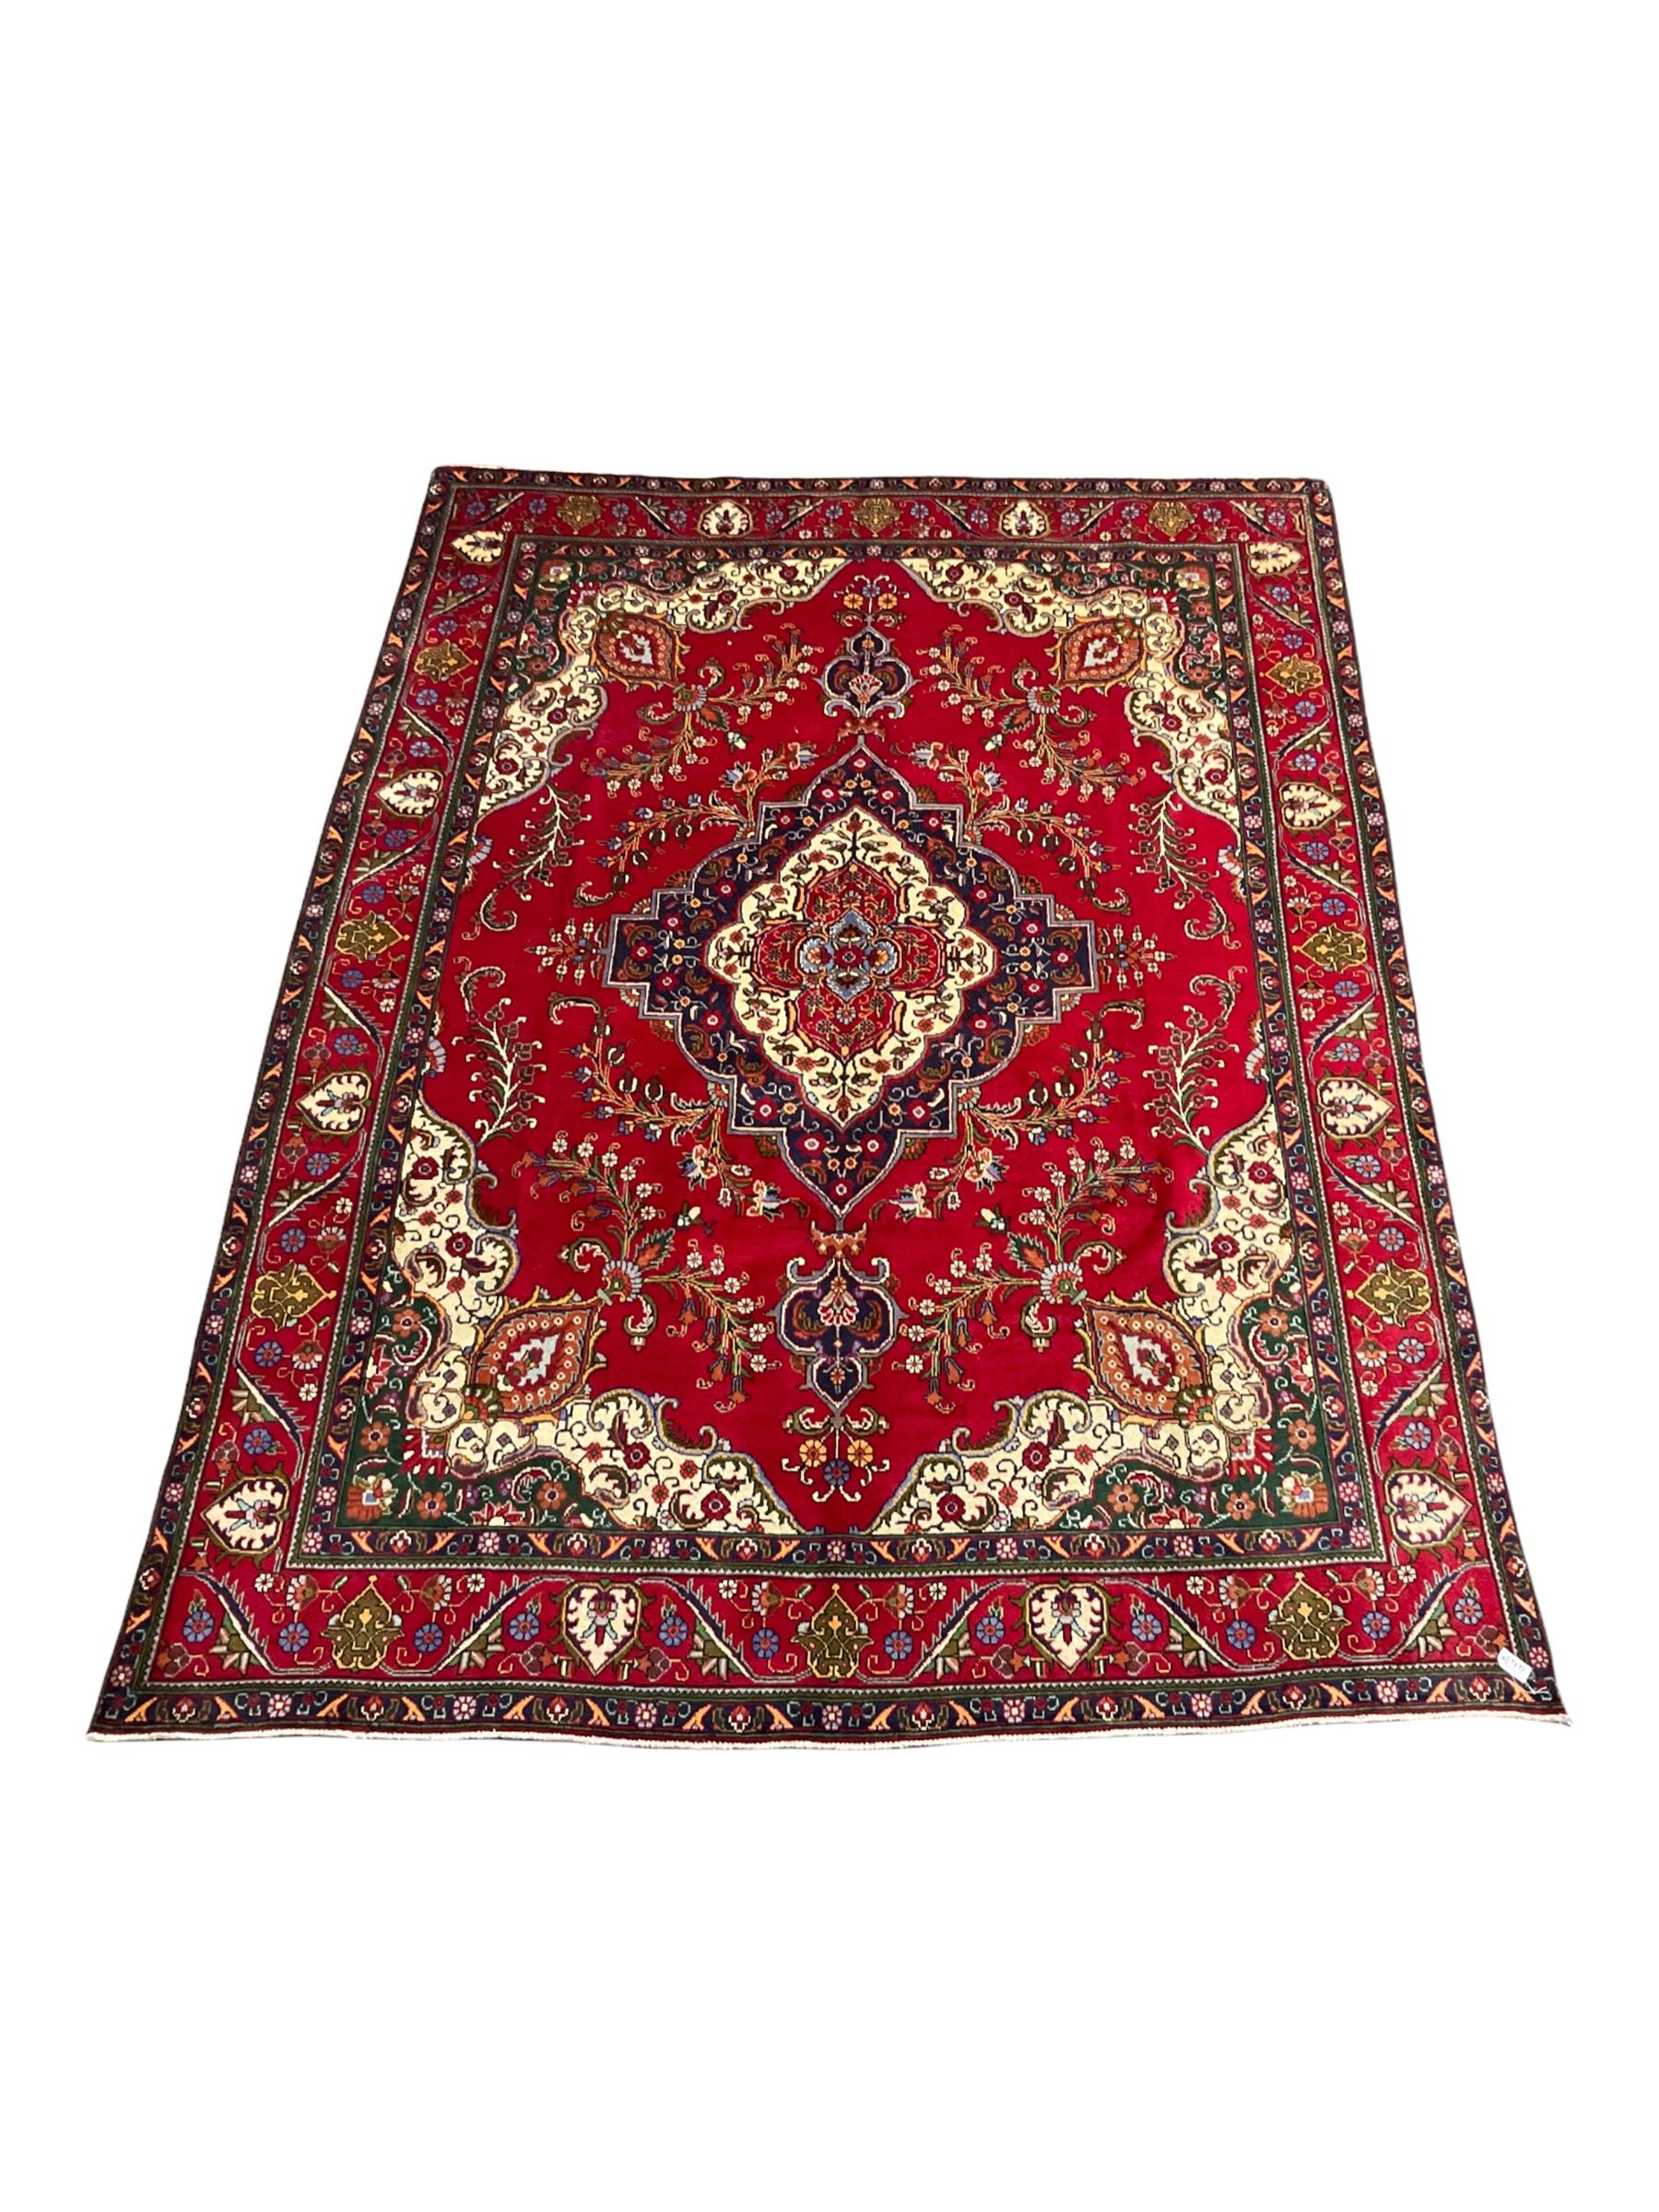 Hand knotted Persian rug from Tabriz region with red field